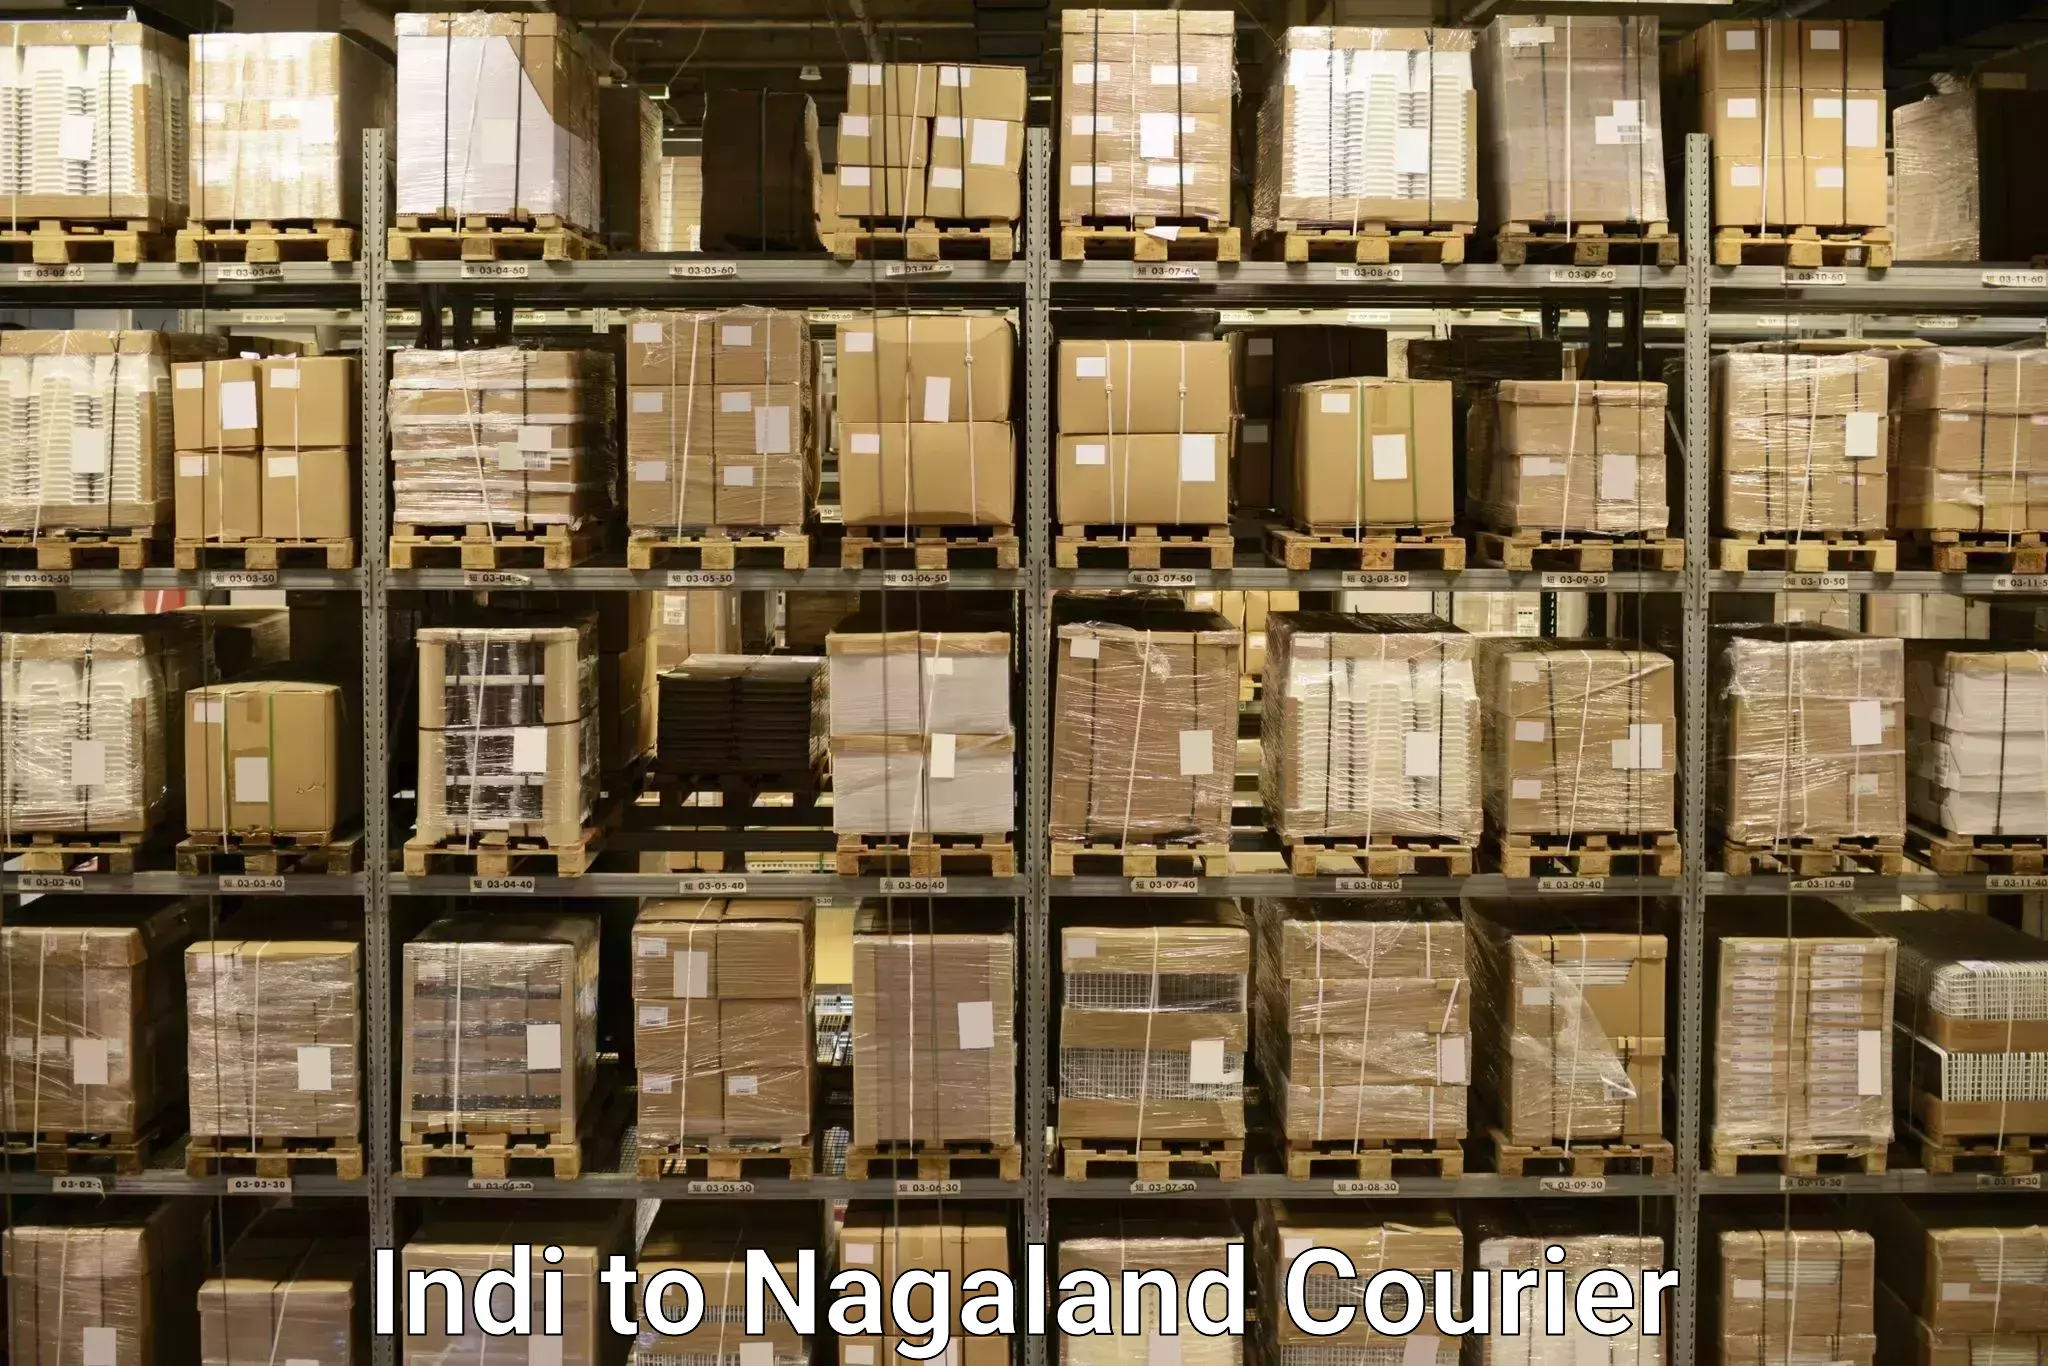 Luggage transport consultancy Indi to Nagaland